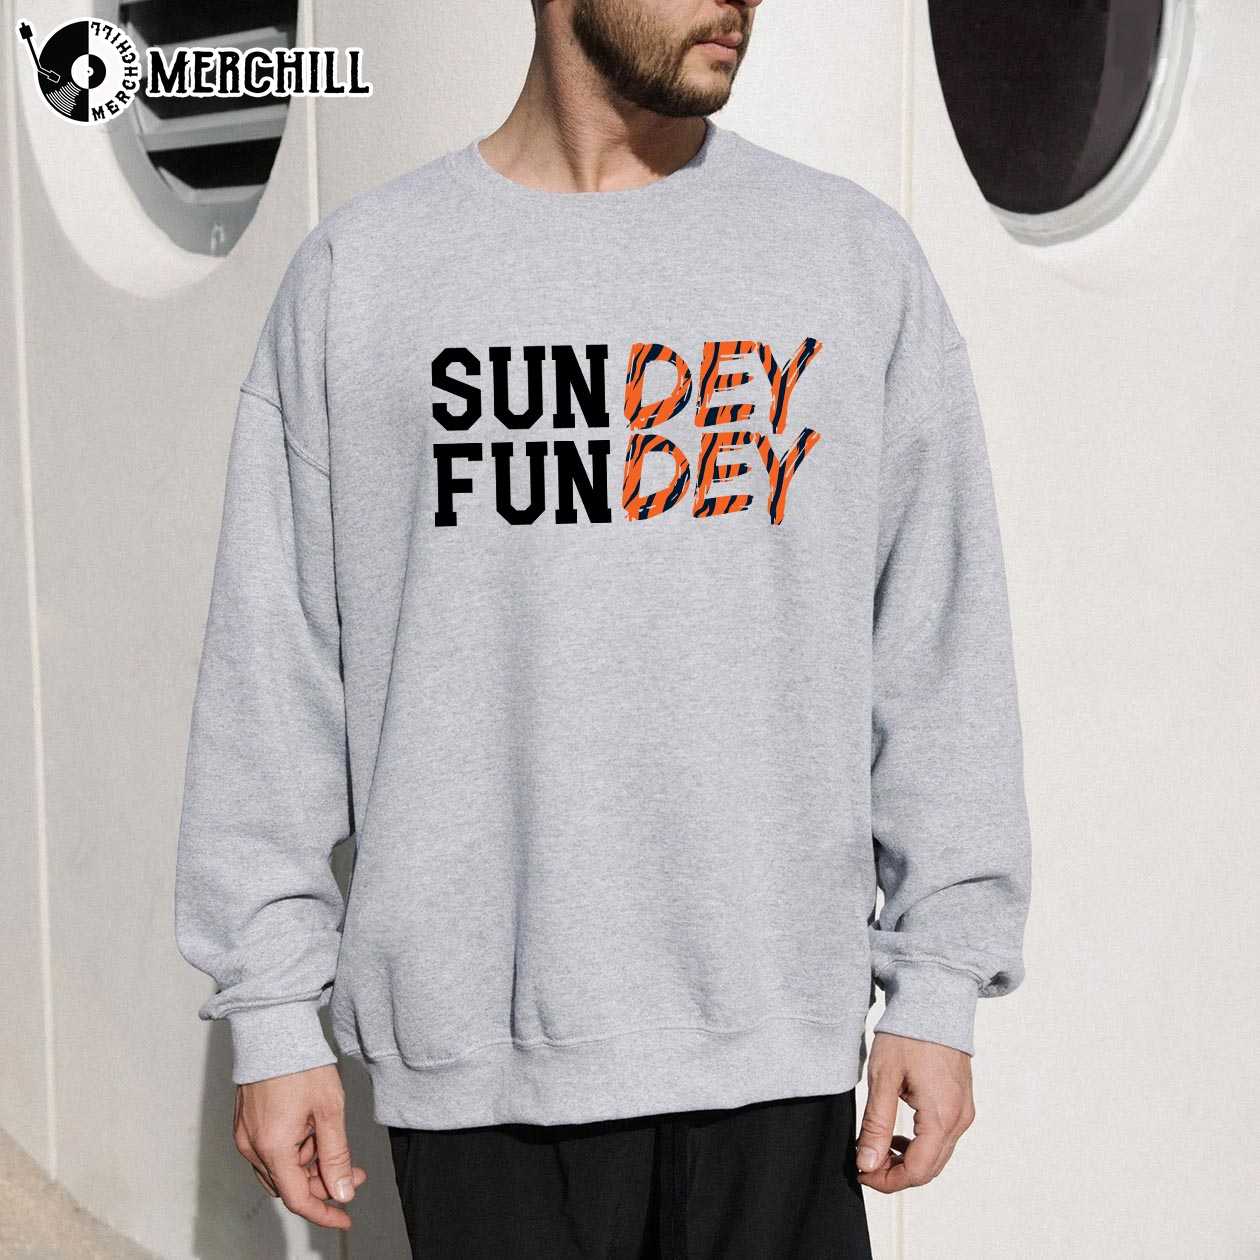 Sundey Fundey Funny Cincinnati Bengals Shirts Gift for Fans